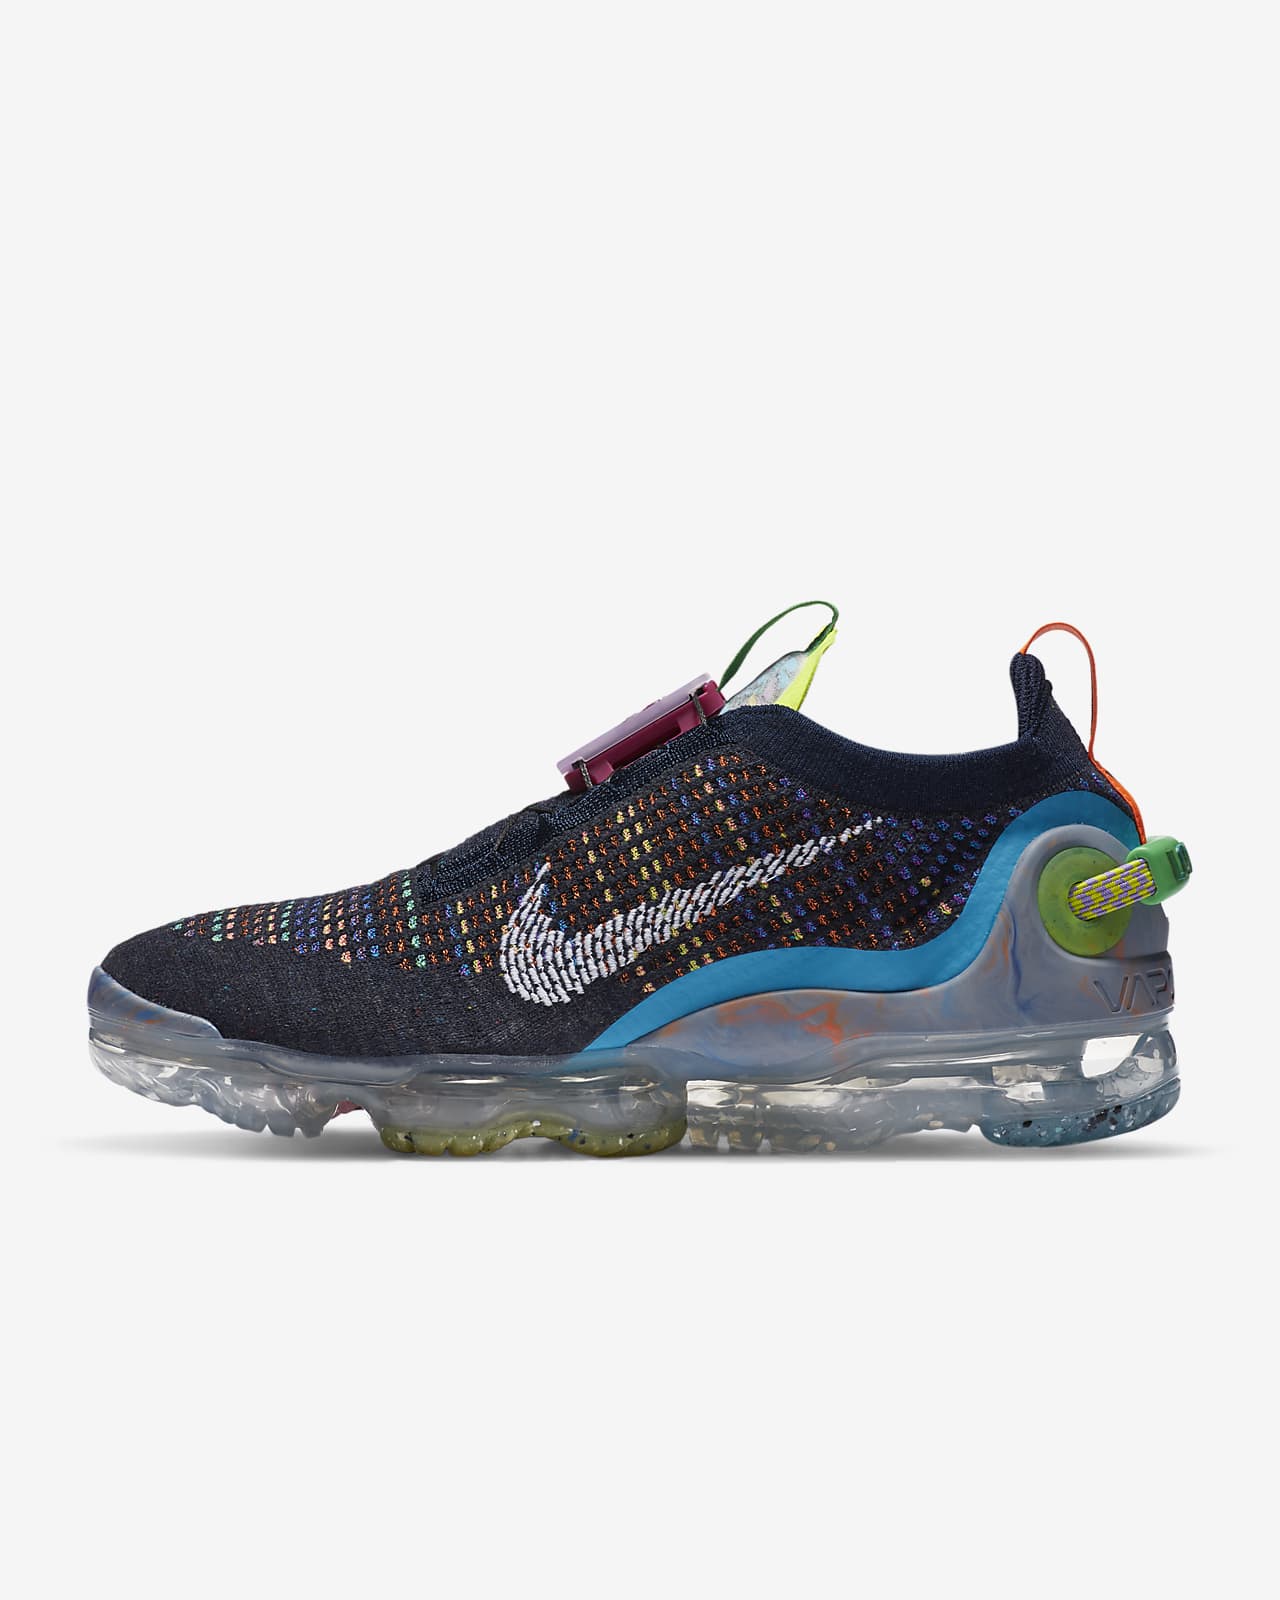 Best Off White VaporMax Shoes Dhgate 2020 YouTube